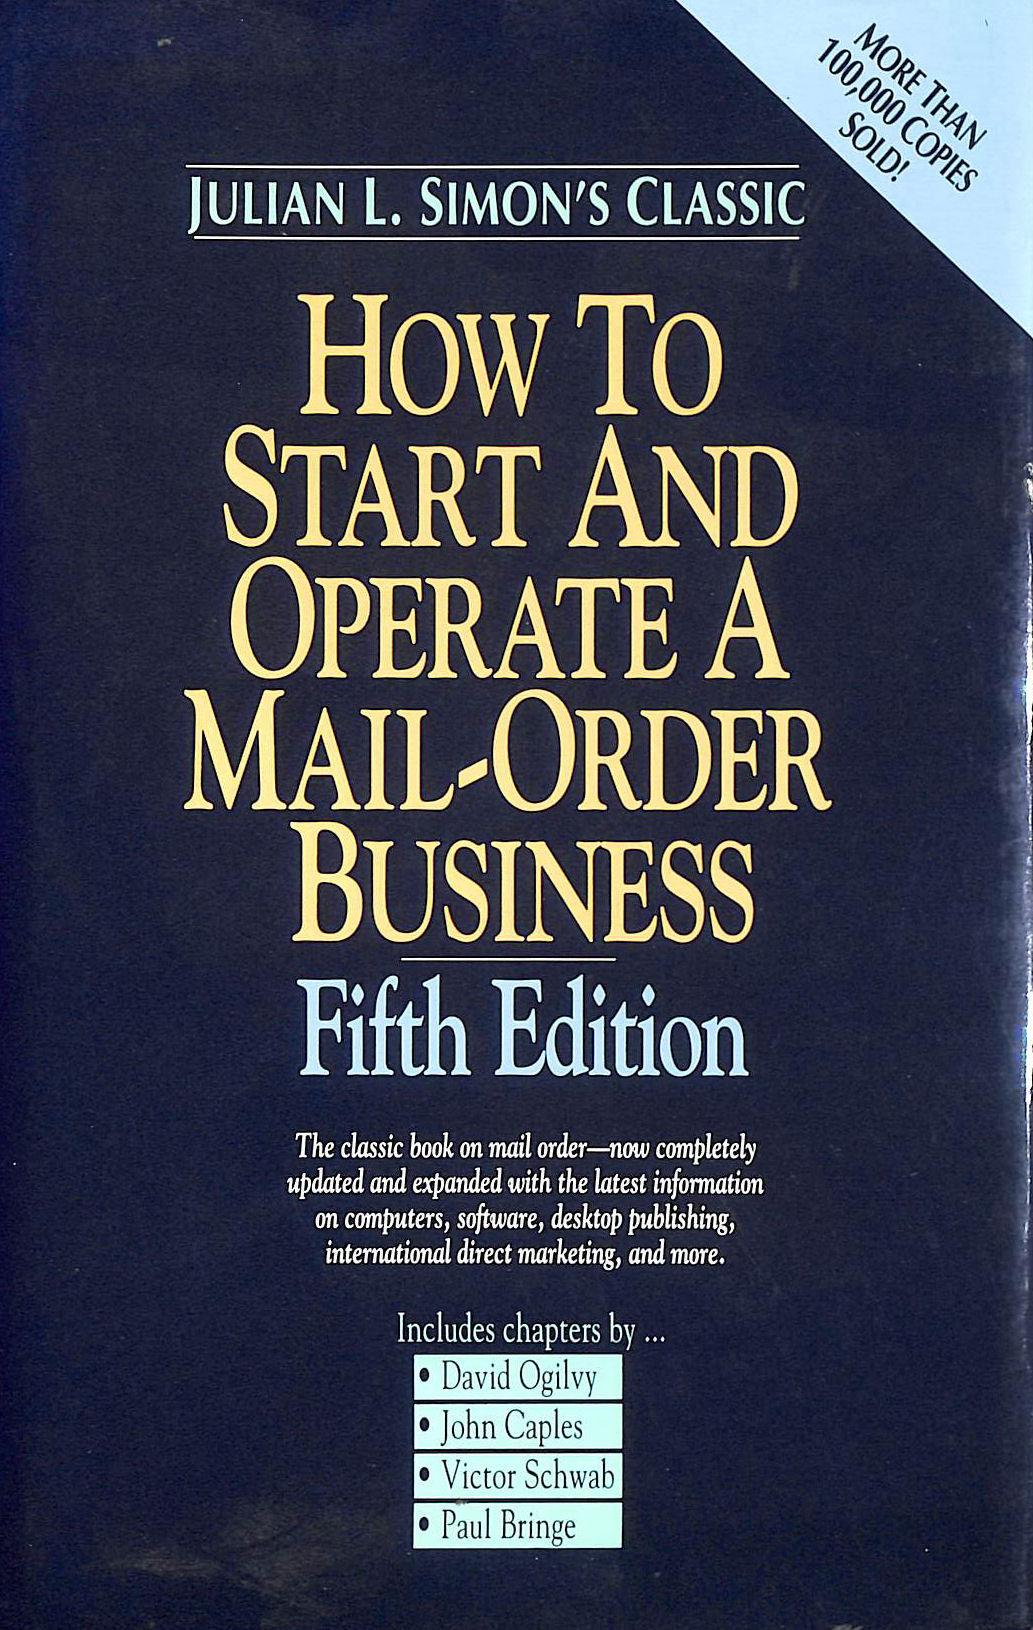 SIMON, JULIAN LINCOLN - How to Start and Operate a Mail Order Business